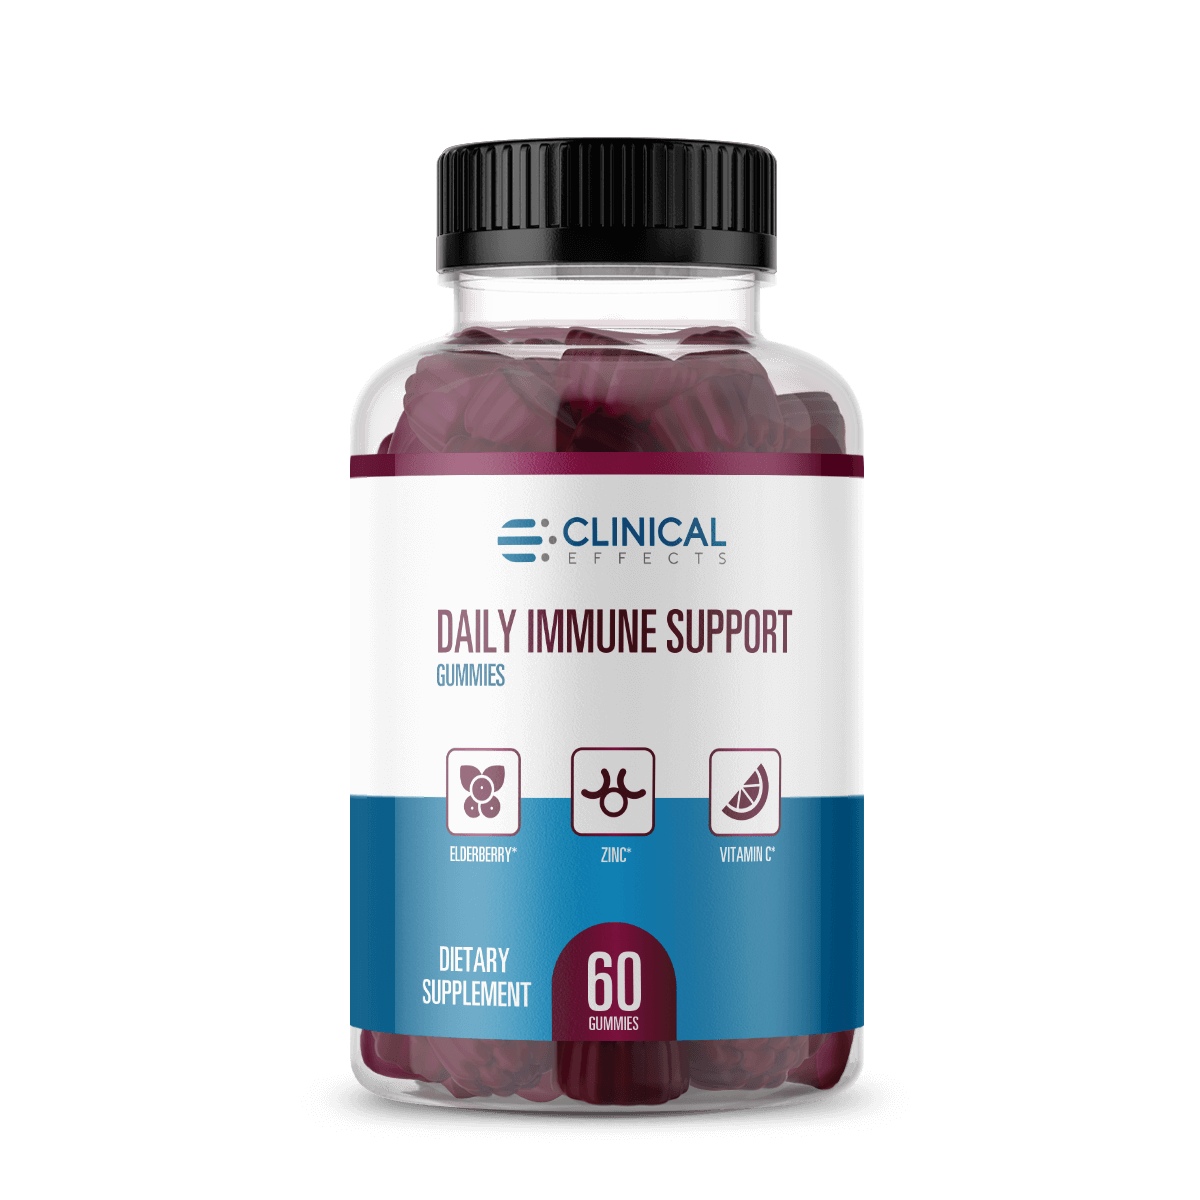 Daily immune support